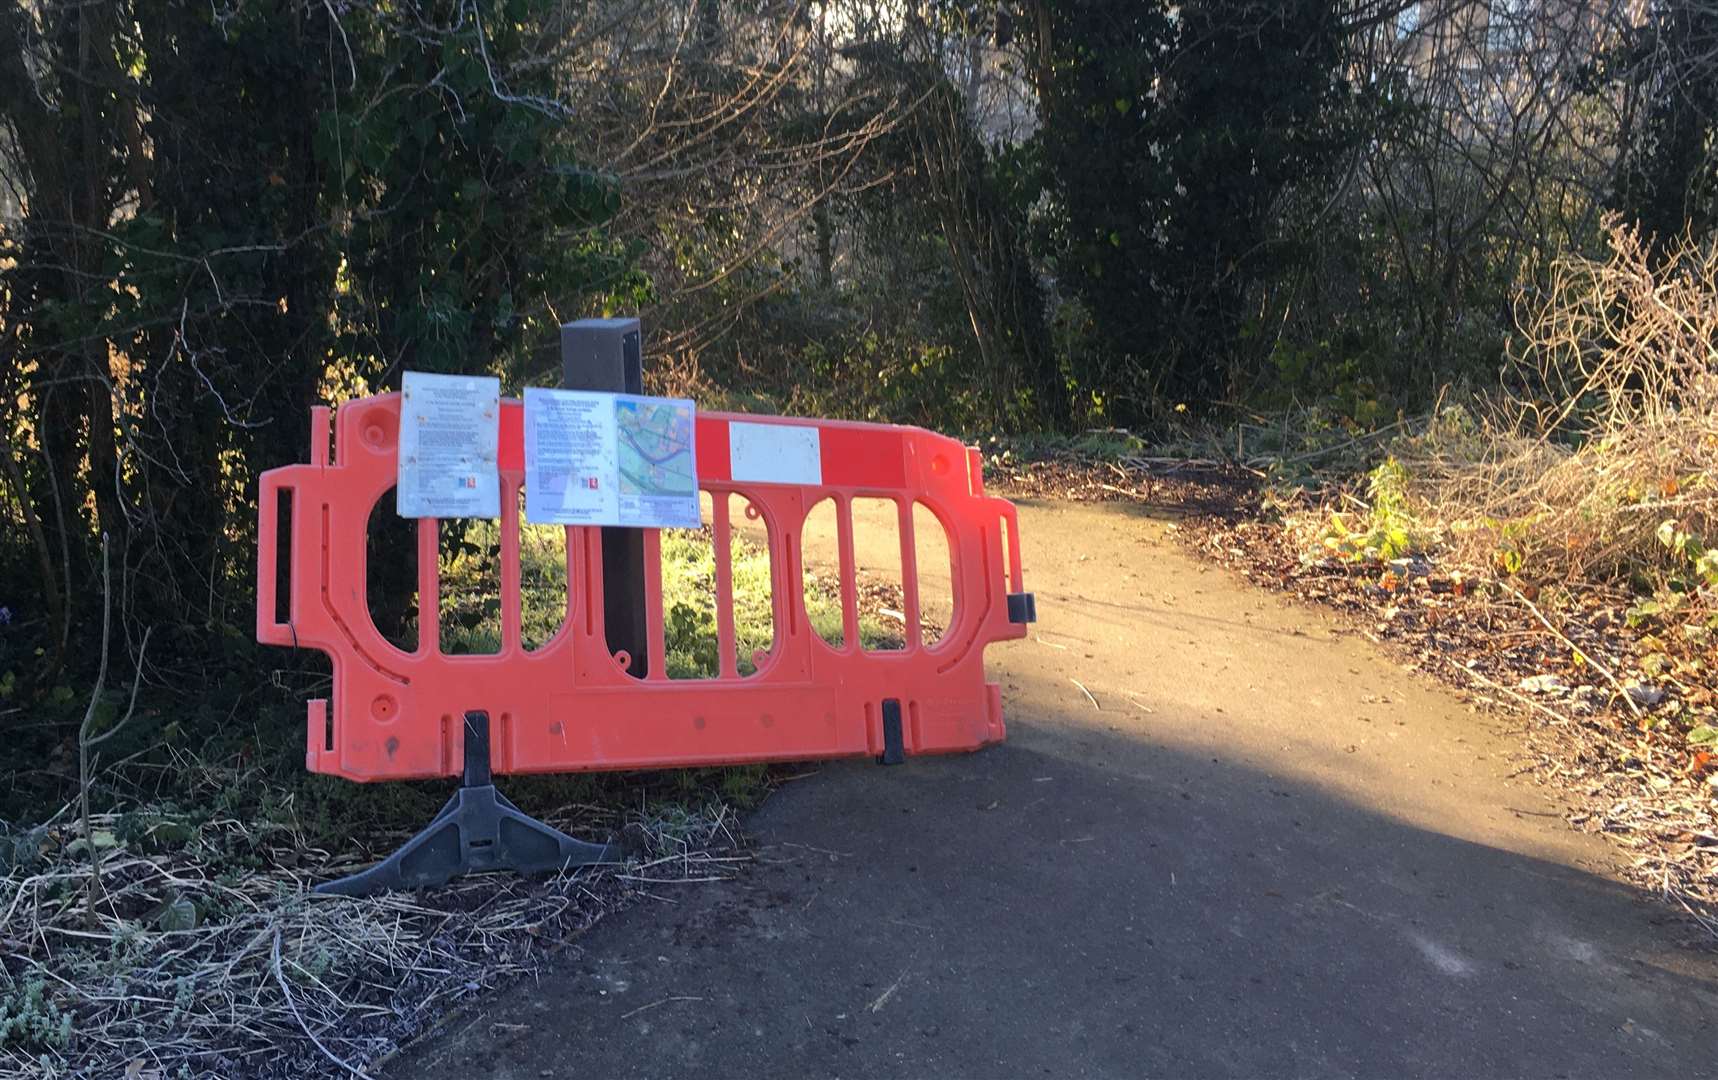 Sign showing footpath closure at the entrance of Bailey Bridge West car park, Aylesford